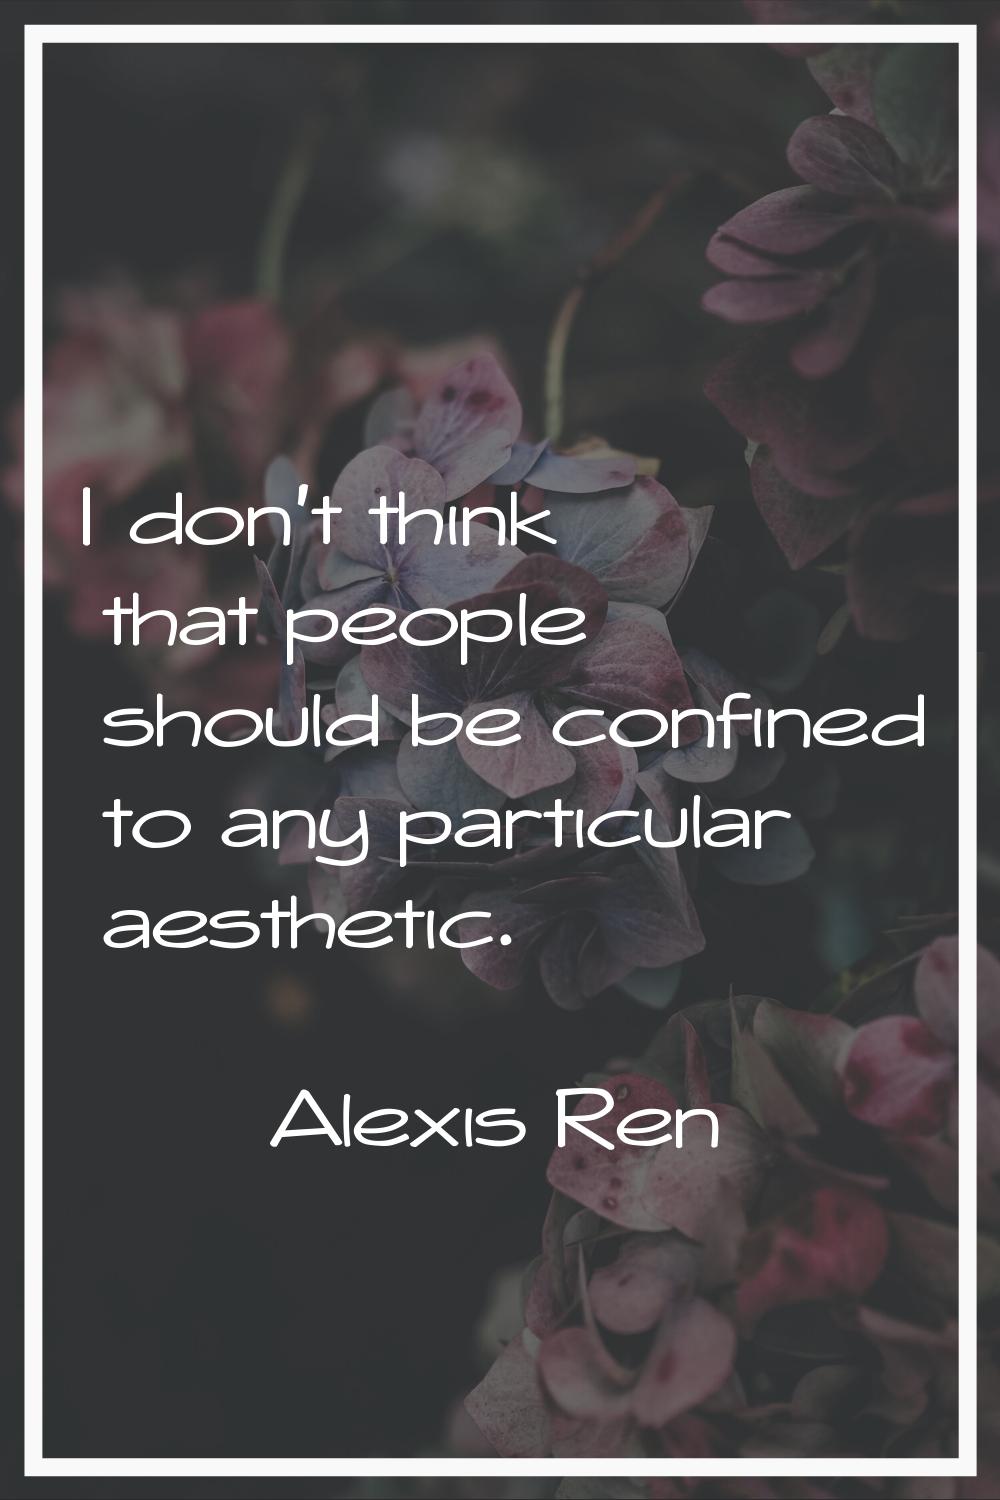 I don't think that people should be confined to any particular aesthetic.